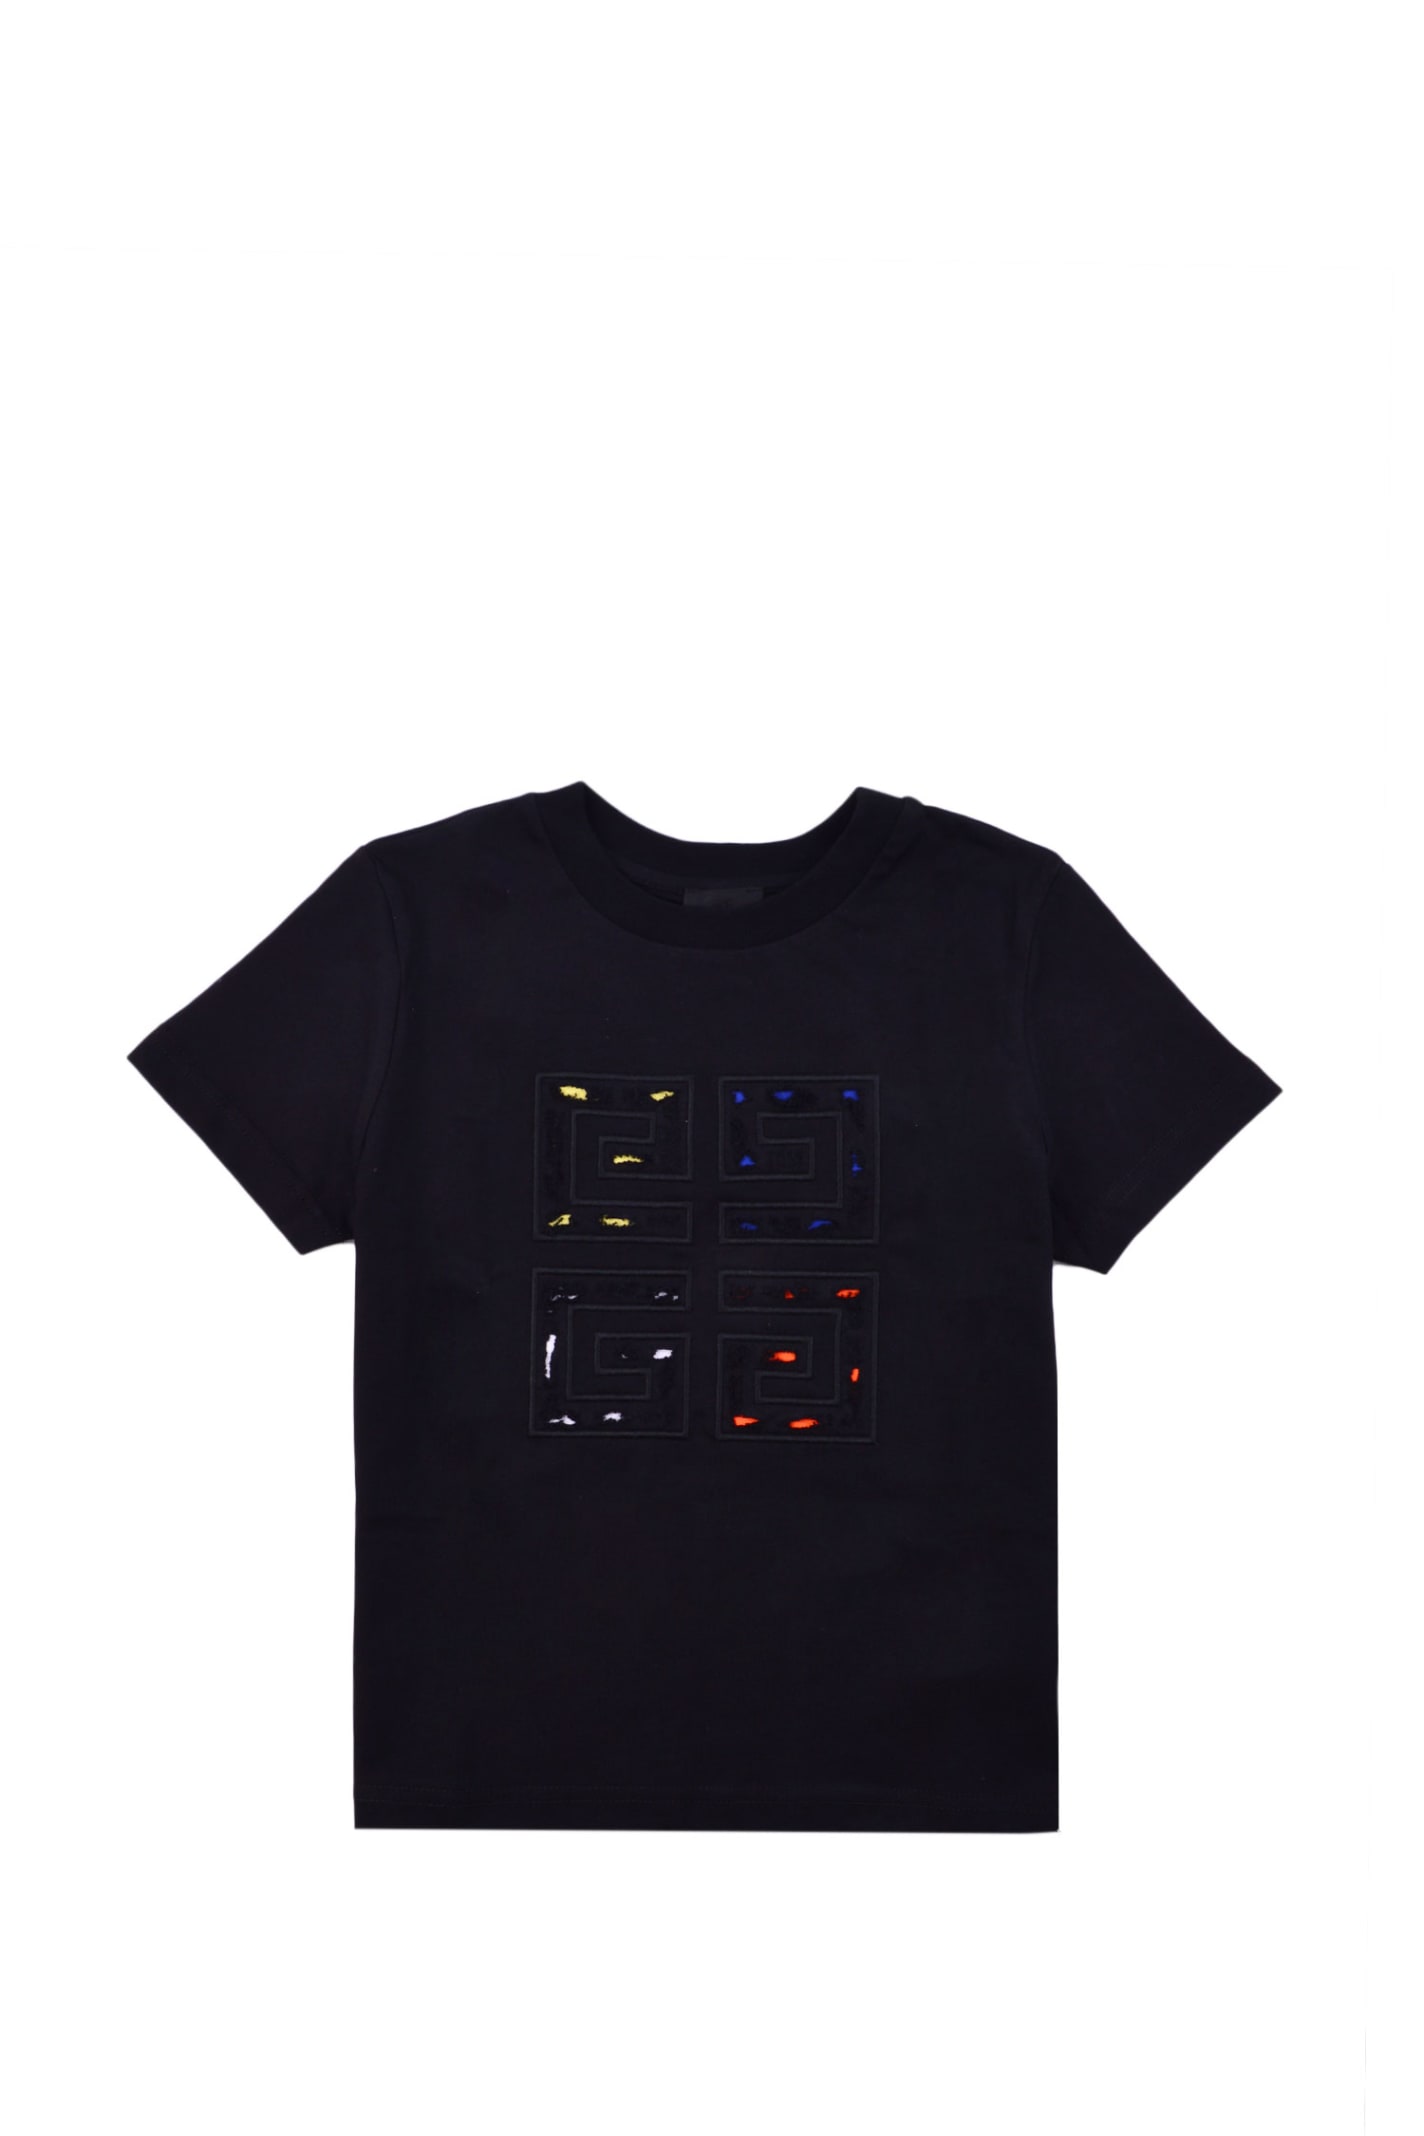 Givenchy Kids' Cotton T-shirt In Back